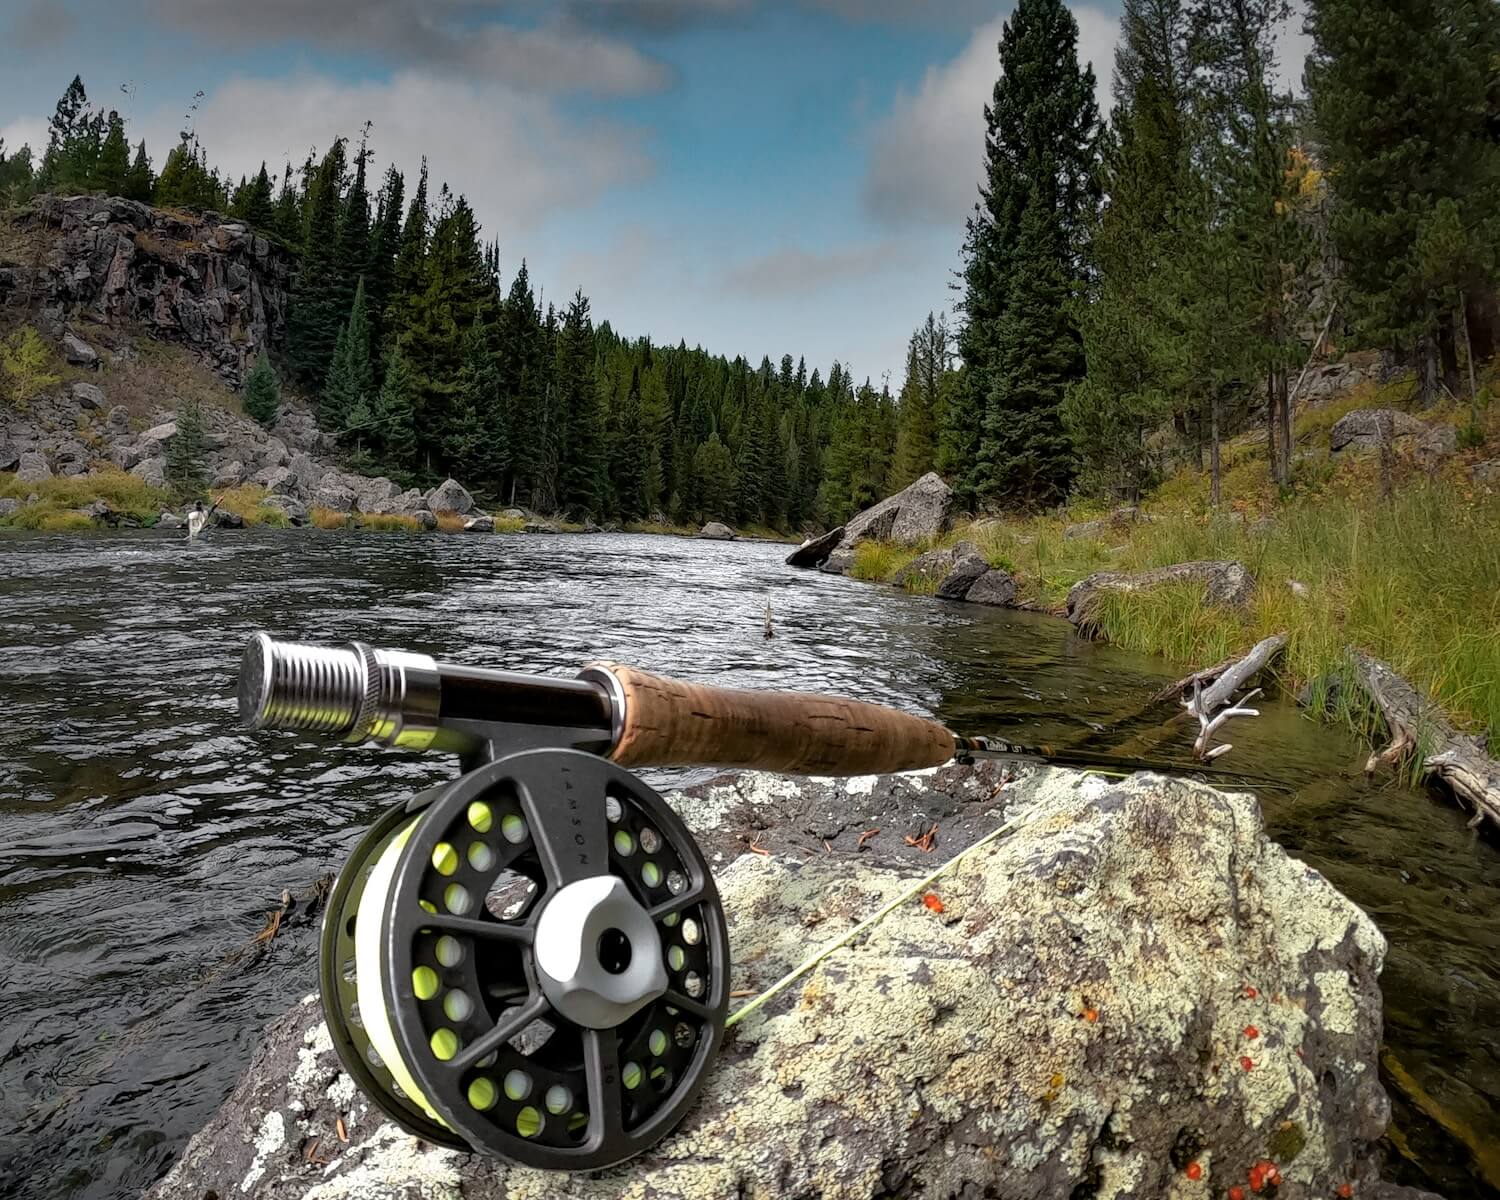 A fly fishing rod on a rock next to a river